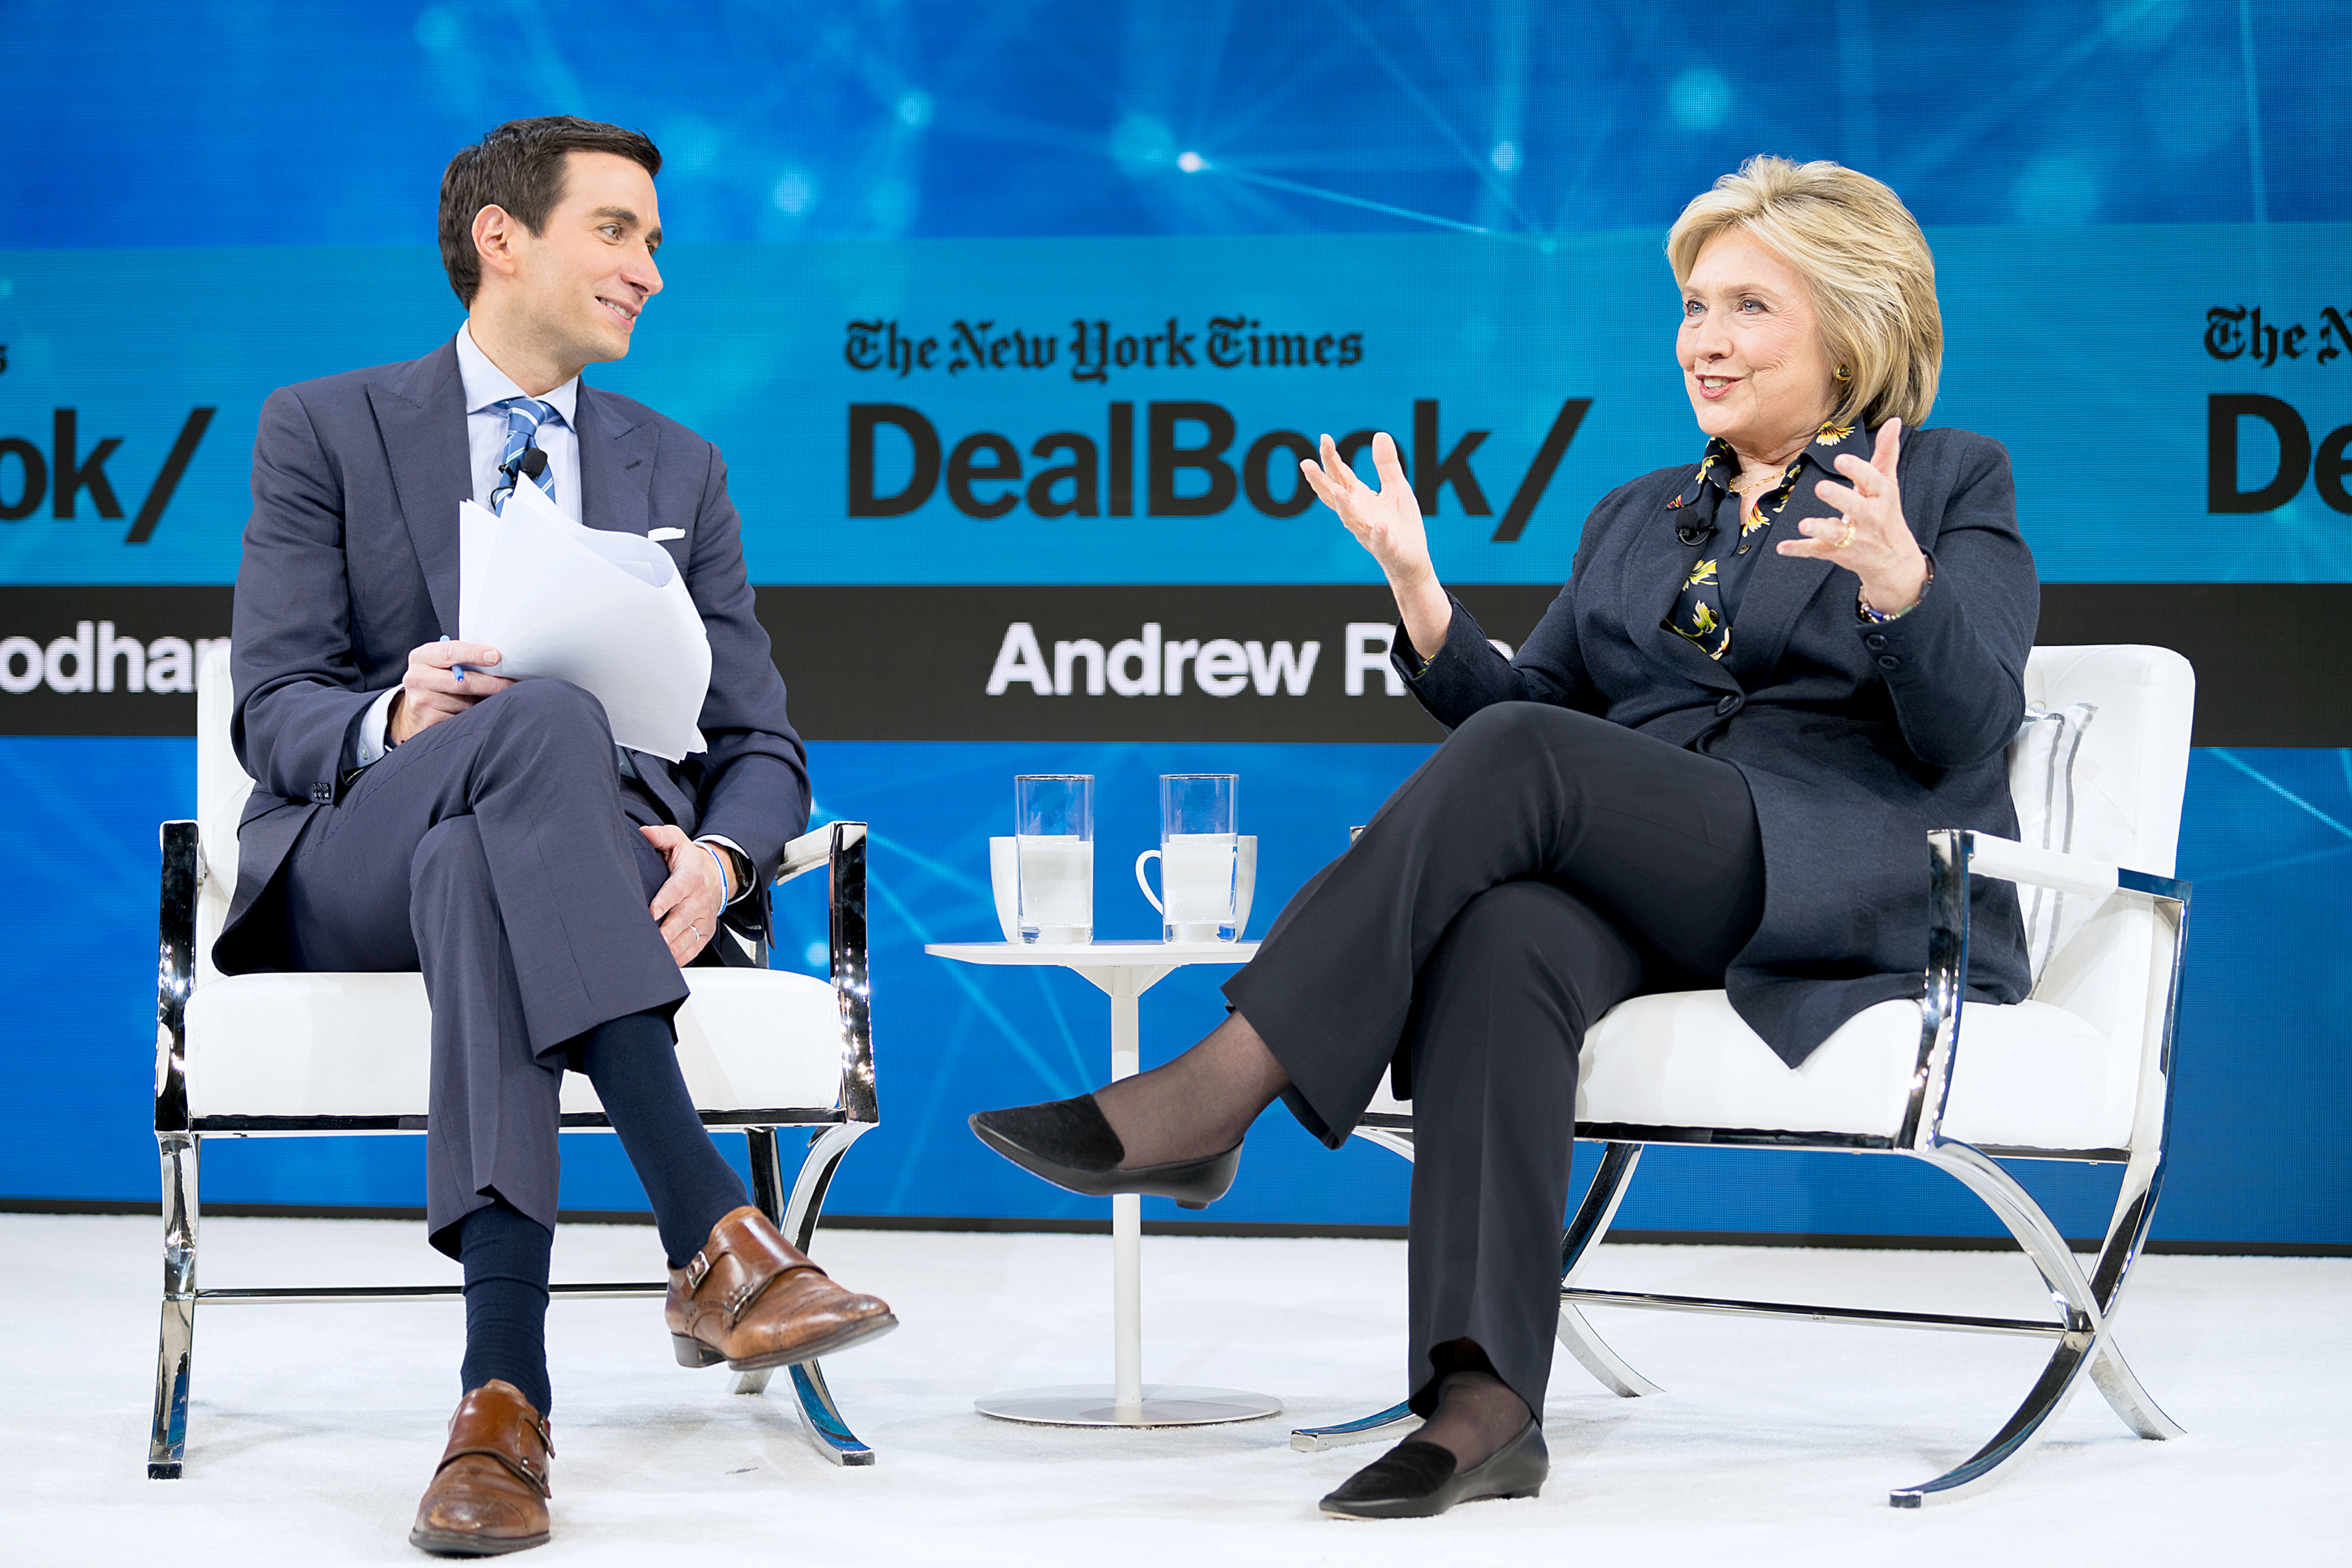 NEW YORK, NEW YORK - NOVEMBER 06: Andrew Ross Sorkin, Editor at Large, Columnist and Founder, DealBook, The New York Times speaks with Hillary Rodham Clinton, Former First Lady, U.S. Senator, U.S. Secretary of State onstage at 2019 New York Times Dealbook on November 06, 2019 in New York City. (Photo by Mike Cohen/Getty Images for The New York Times)